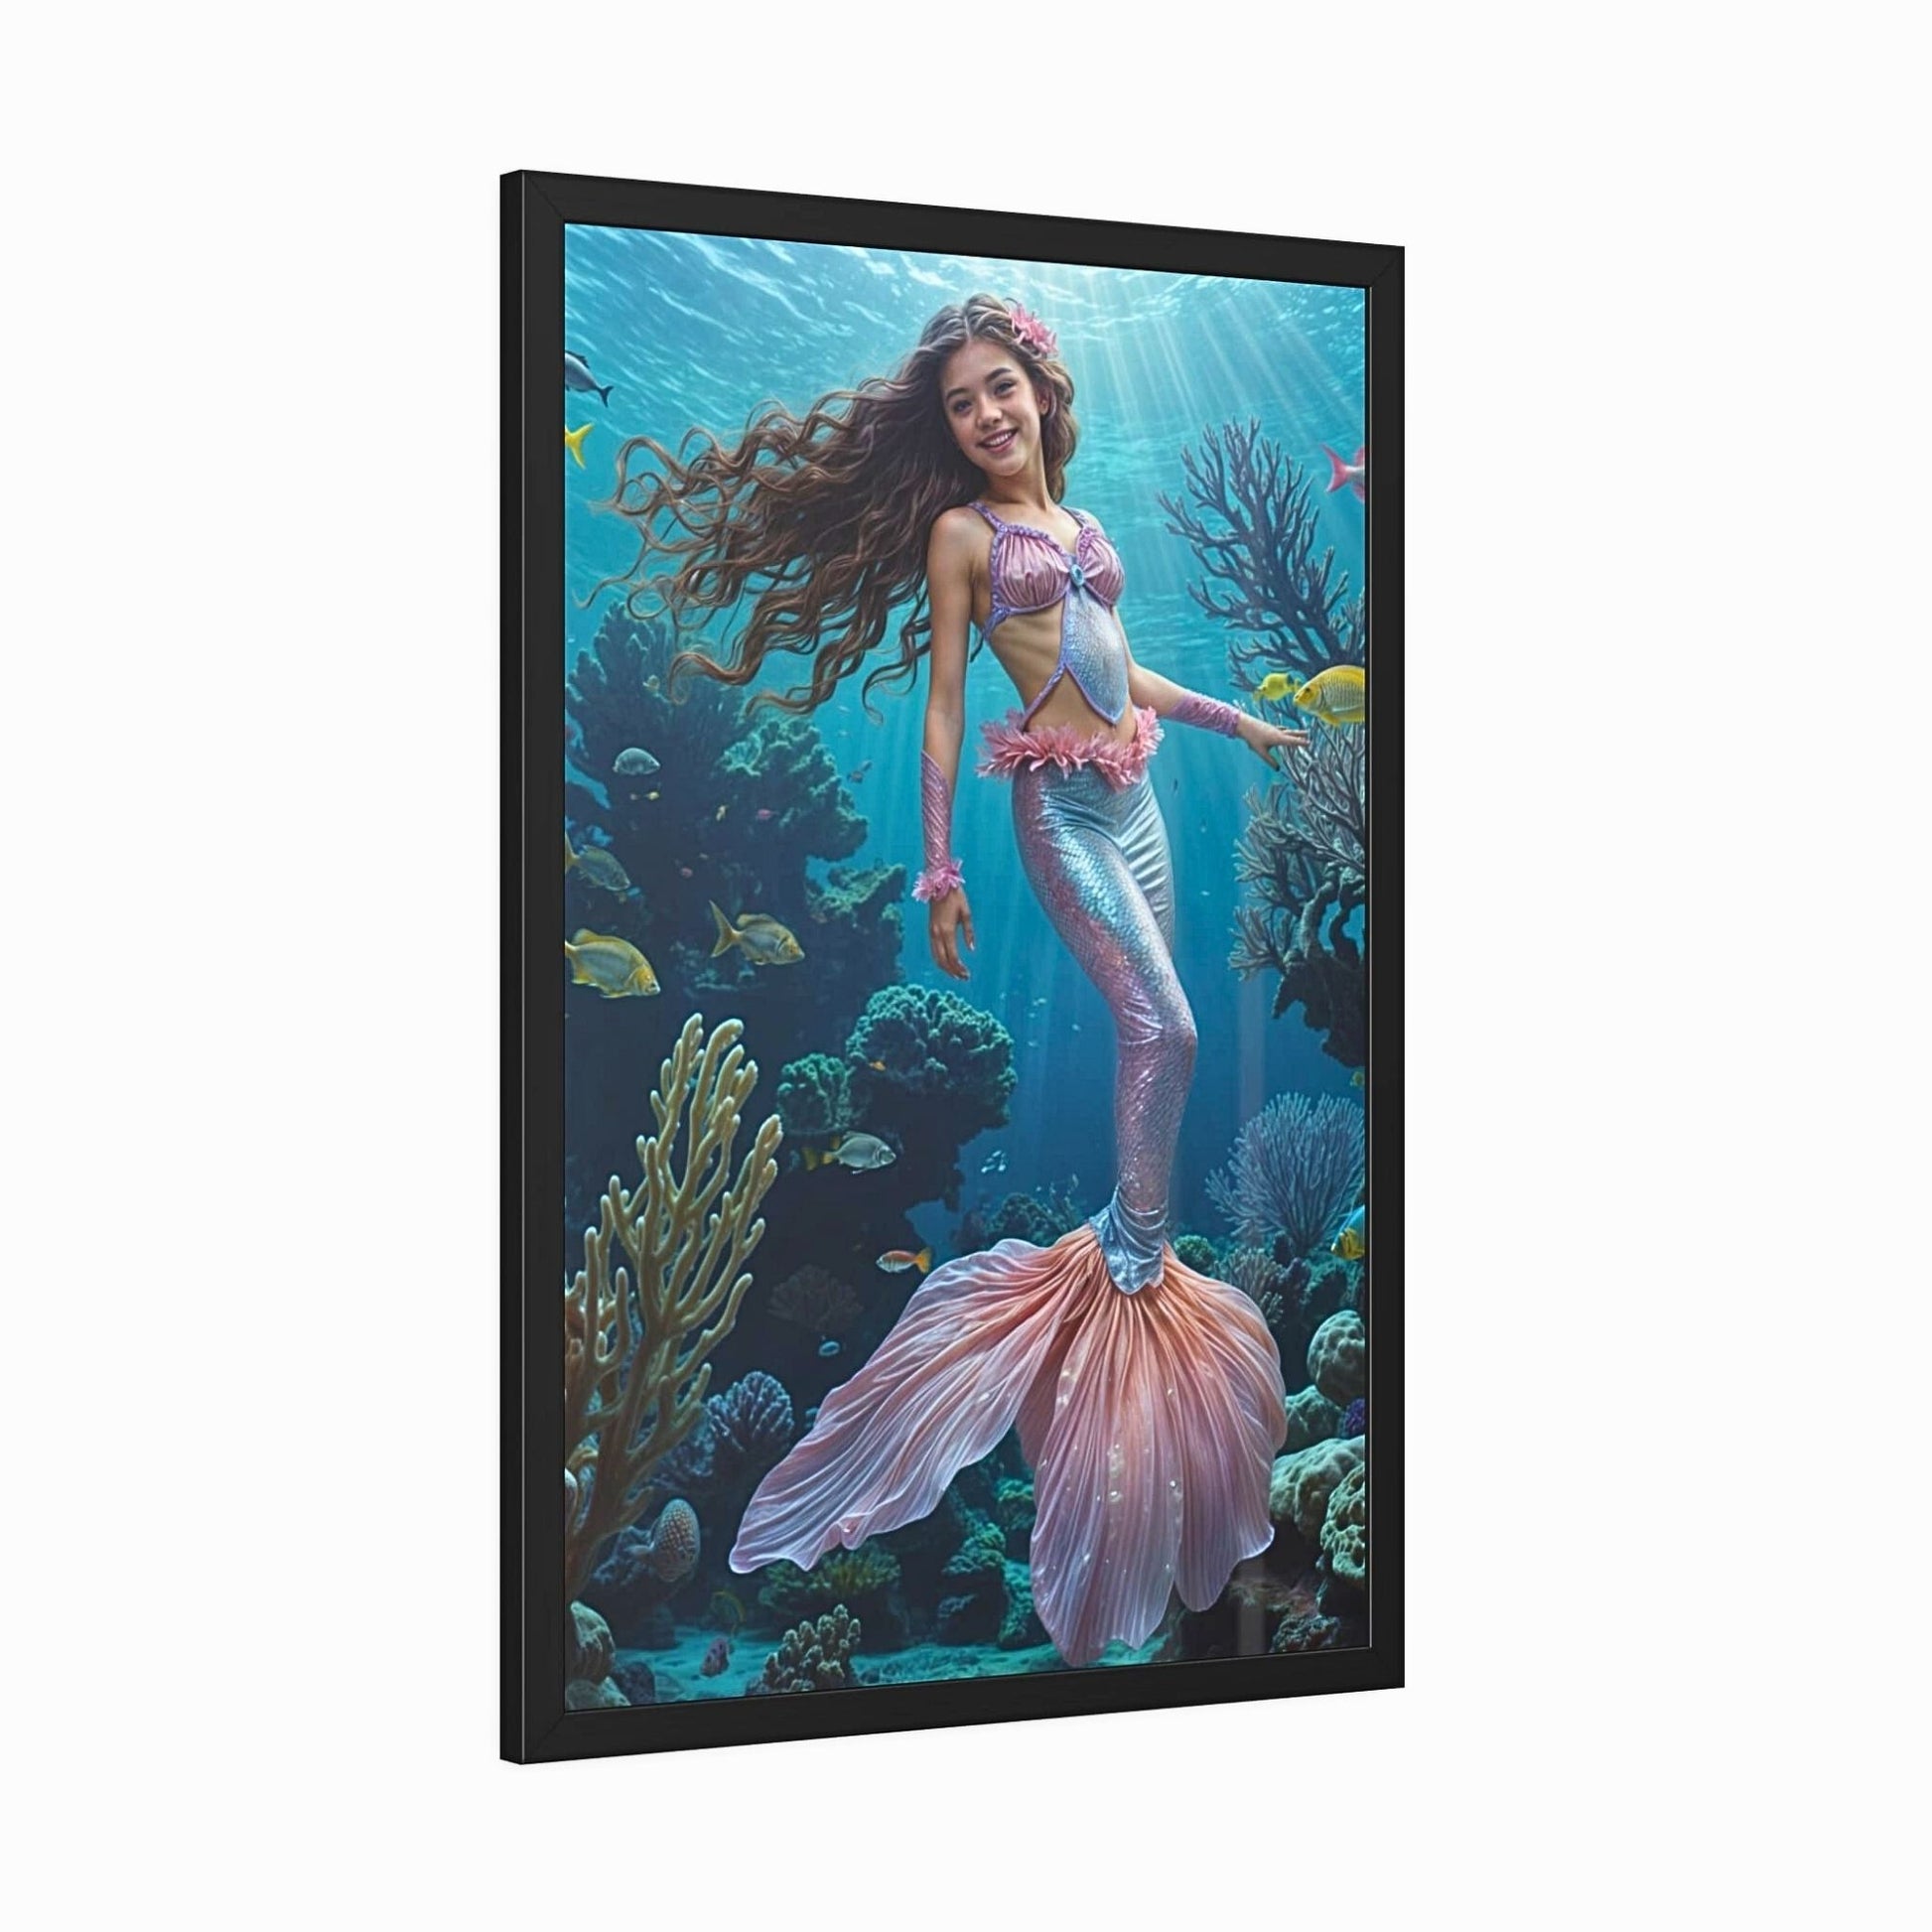 Surprise your daughter with a magical Custom Mermaid Portrait from Photo, perfect for her Birthday. Our Personalized Princess Mermaid Portraits make stunning Wall Art and unique gifts for daughters, sisters, moms, or girlfriends. Turn any photo into a cherished keepsake with our Custom Mermaid Art portraits, ideal for celebrating special moments and creating lasting memories.